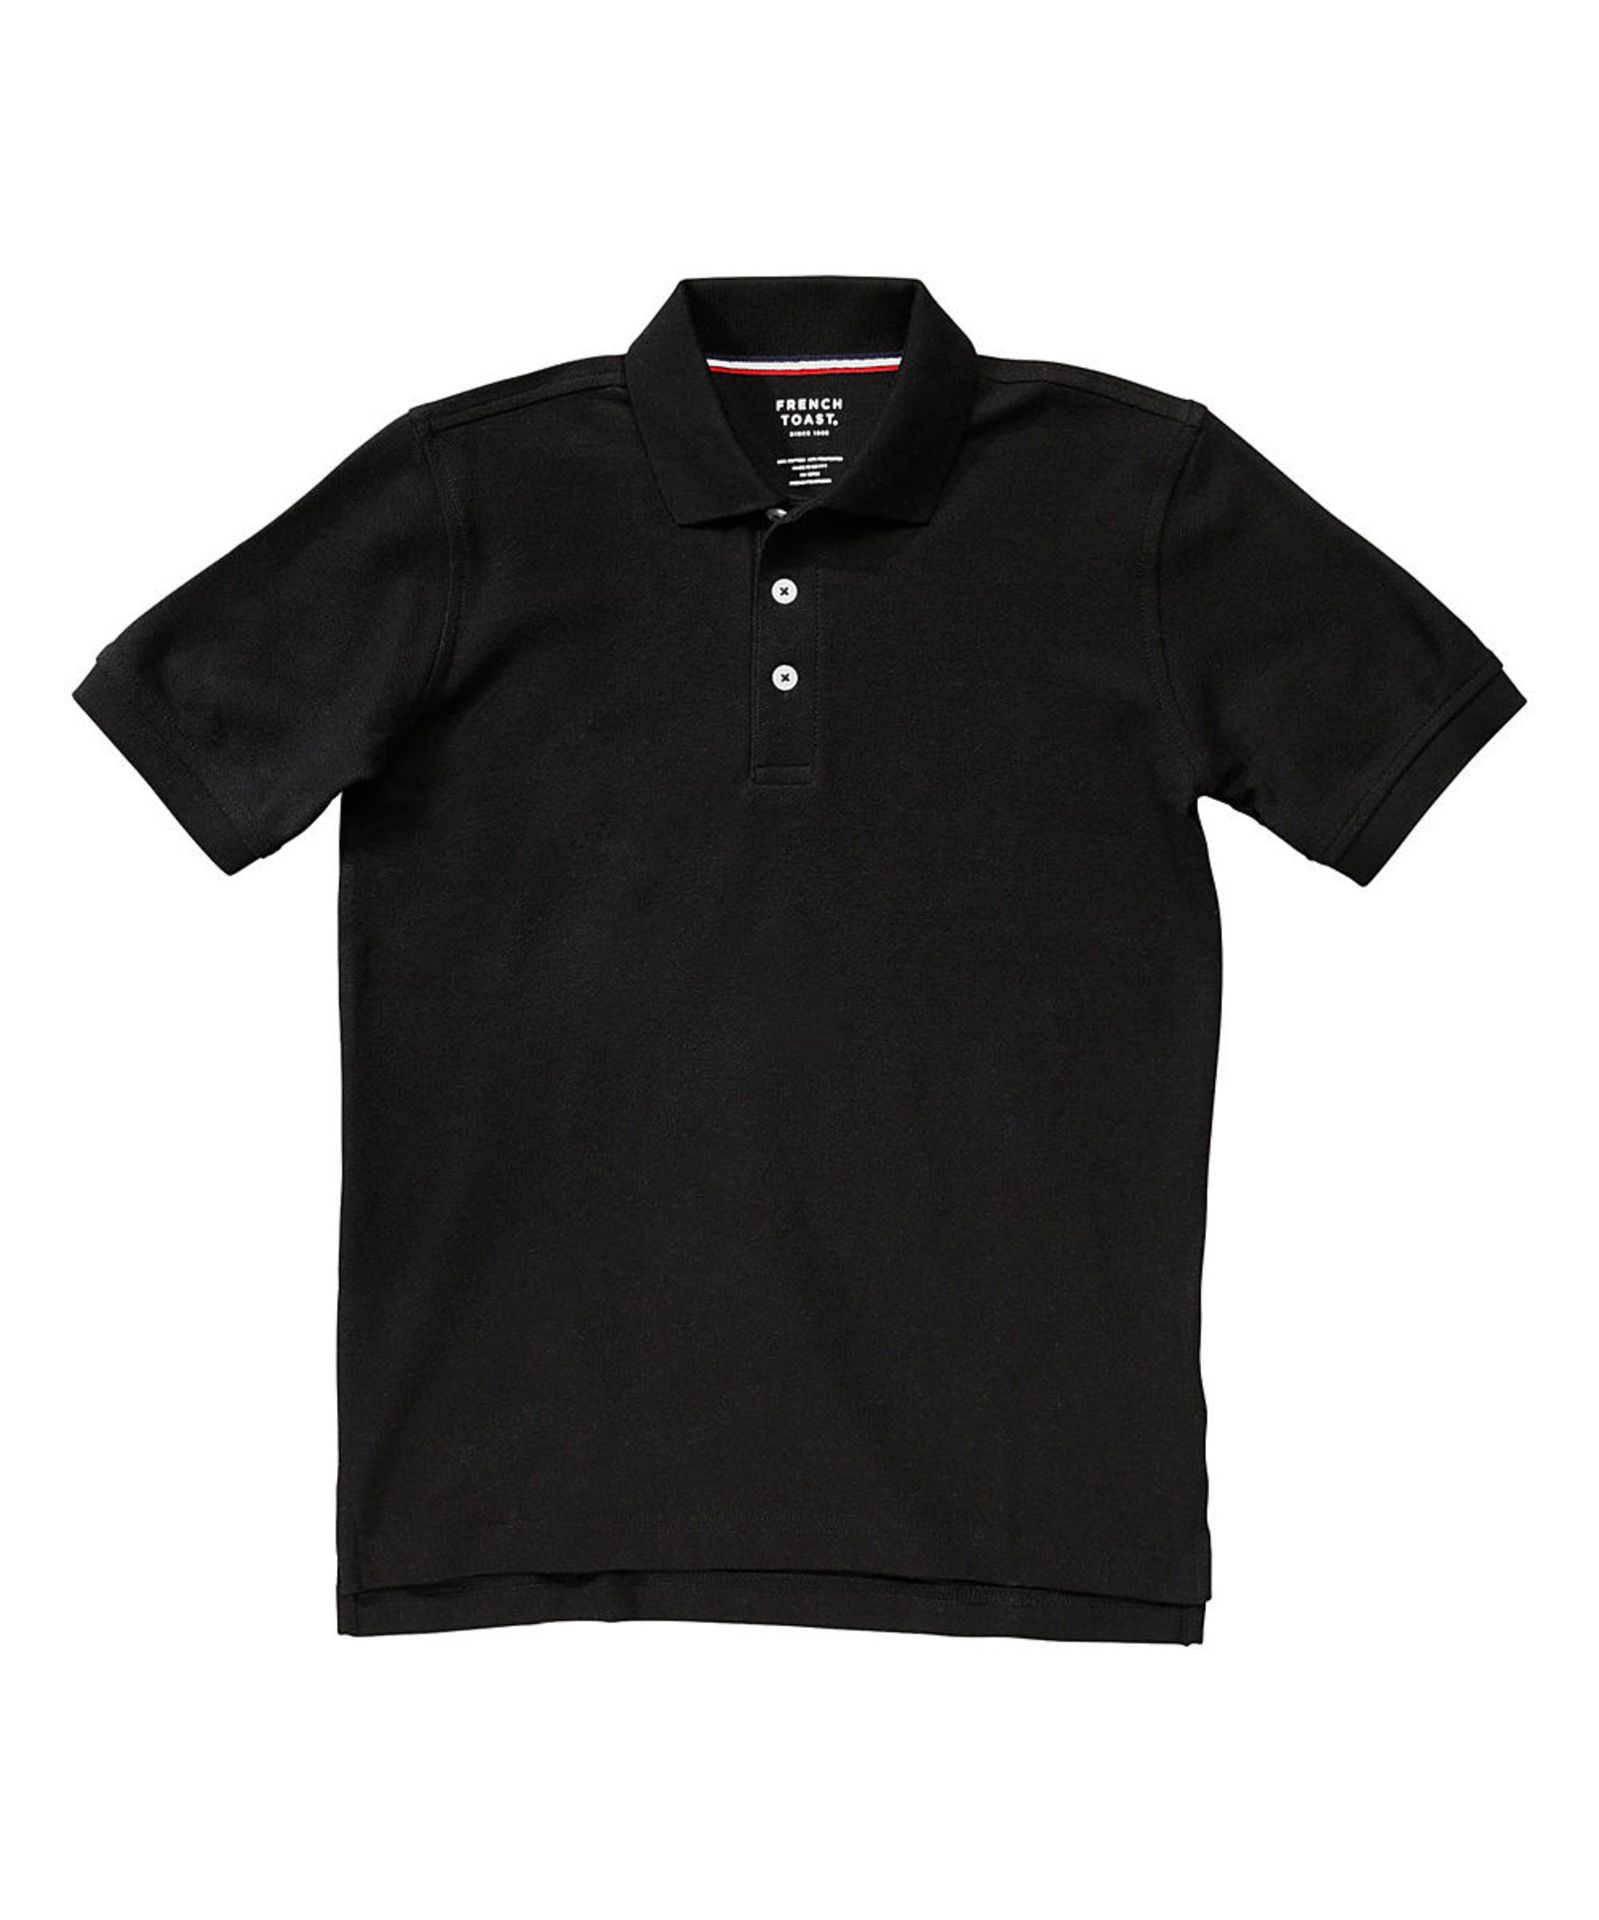 Brand New French Toast Black Pique Polo - Kids & Tween - US XS